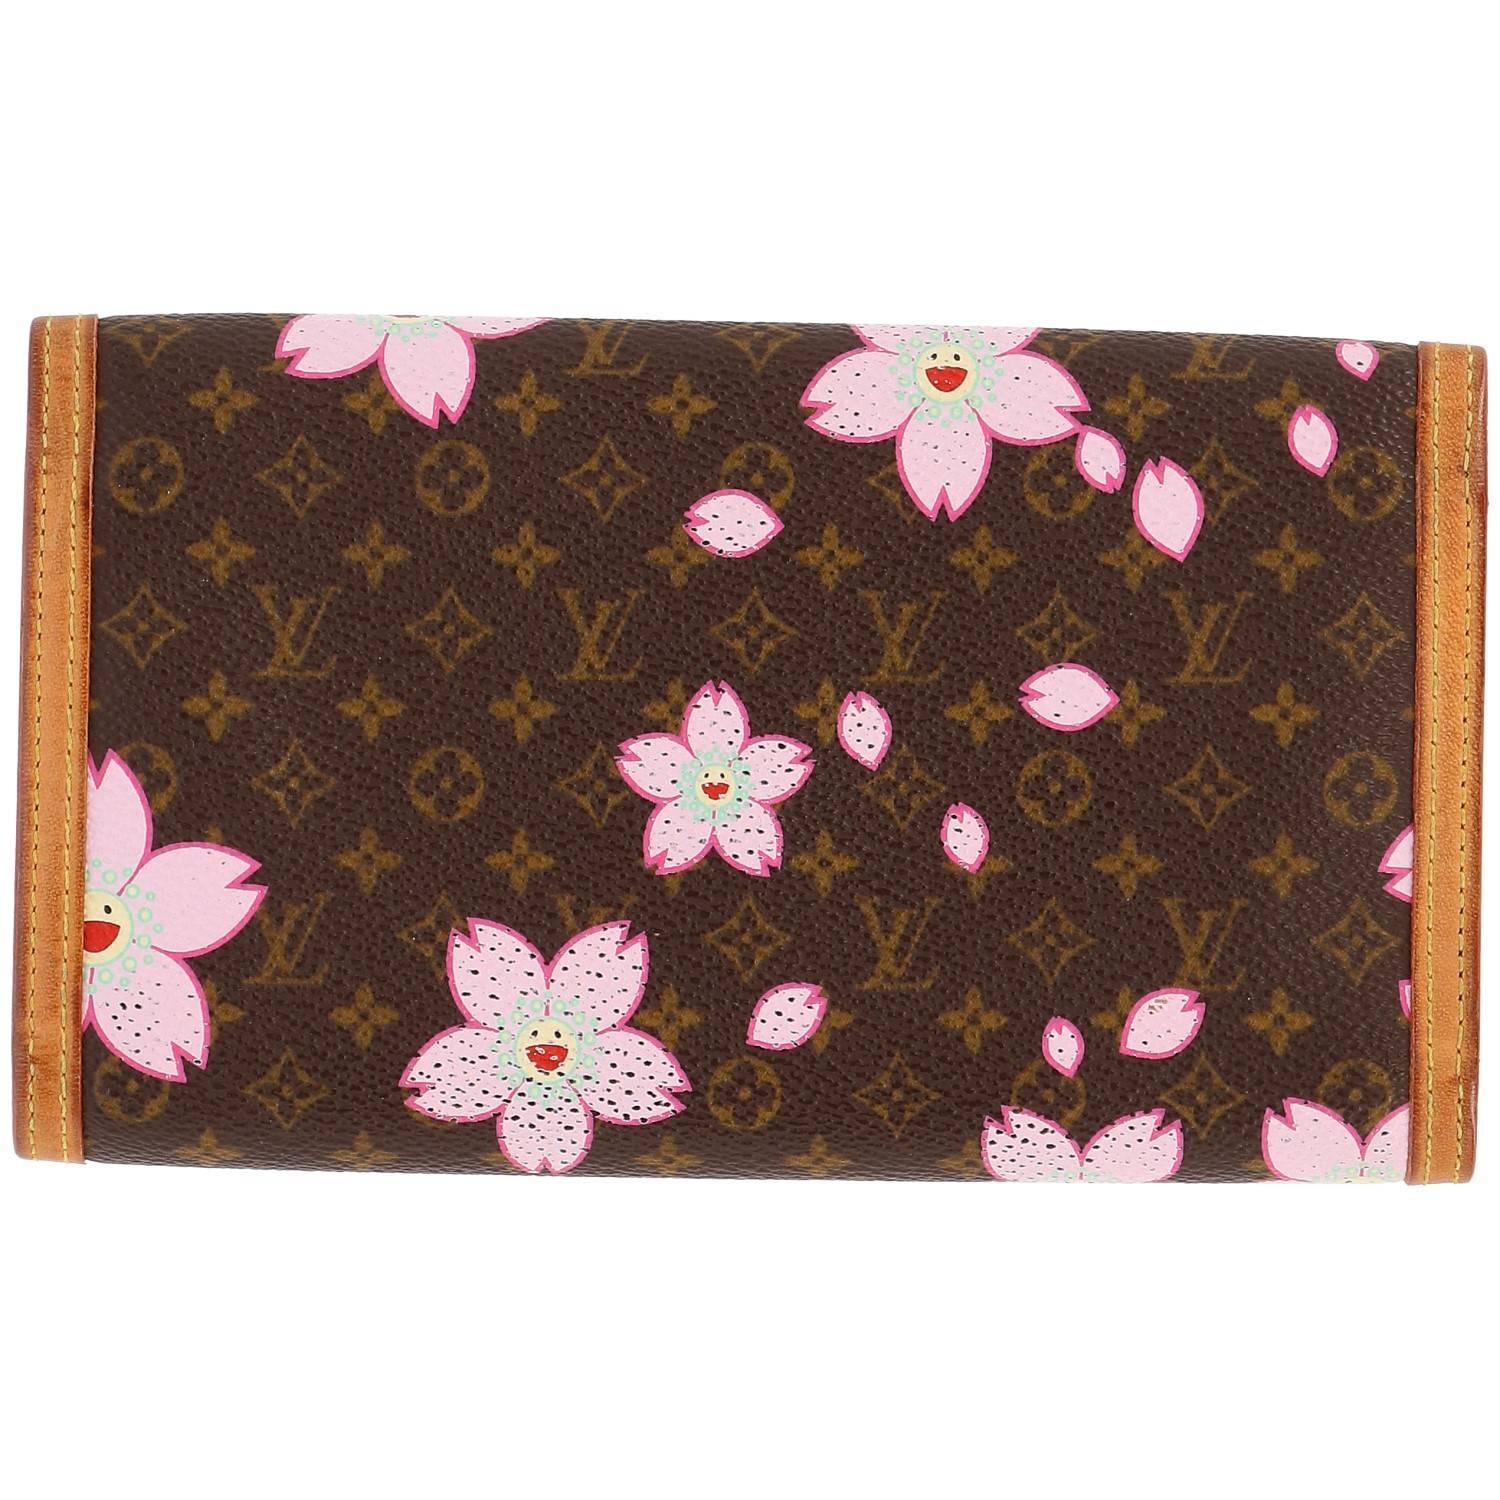 Louis Vuitton wallet in monogrammed canvas with a floral print. Features leather inside and details and metal corners.
Shows minor signs of wear.

Measurements
Height: 10,5 cm 
Width: 18,5 cm 
Depth: 2,3 cm
